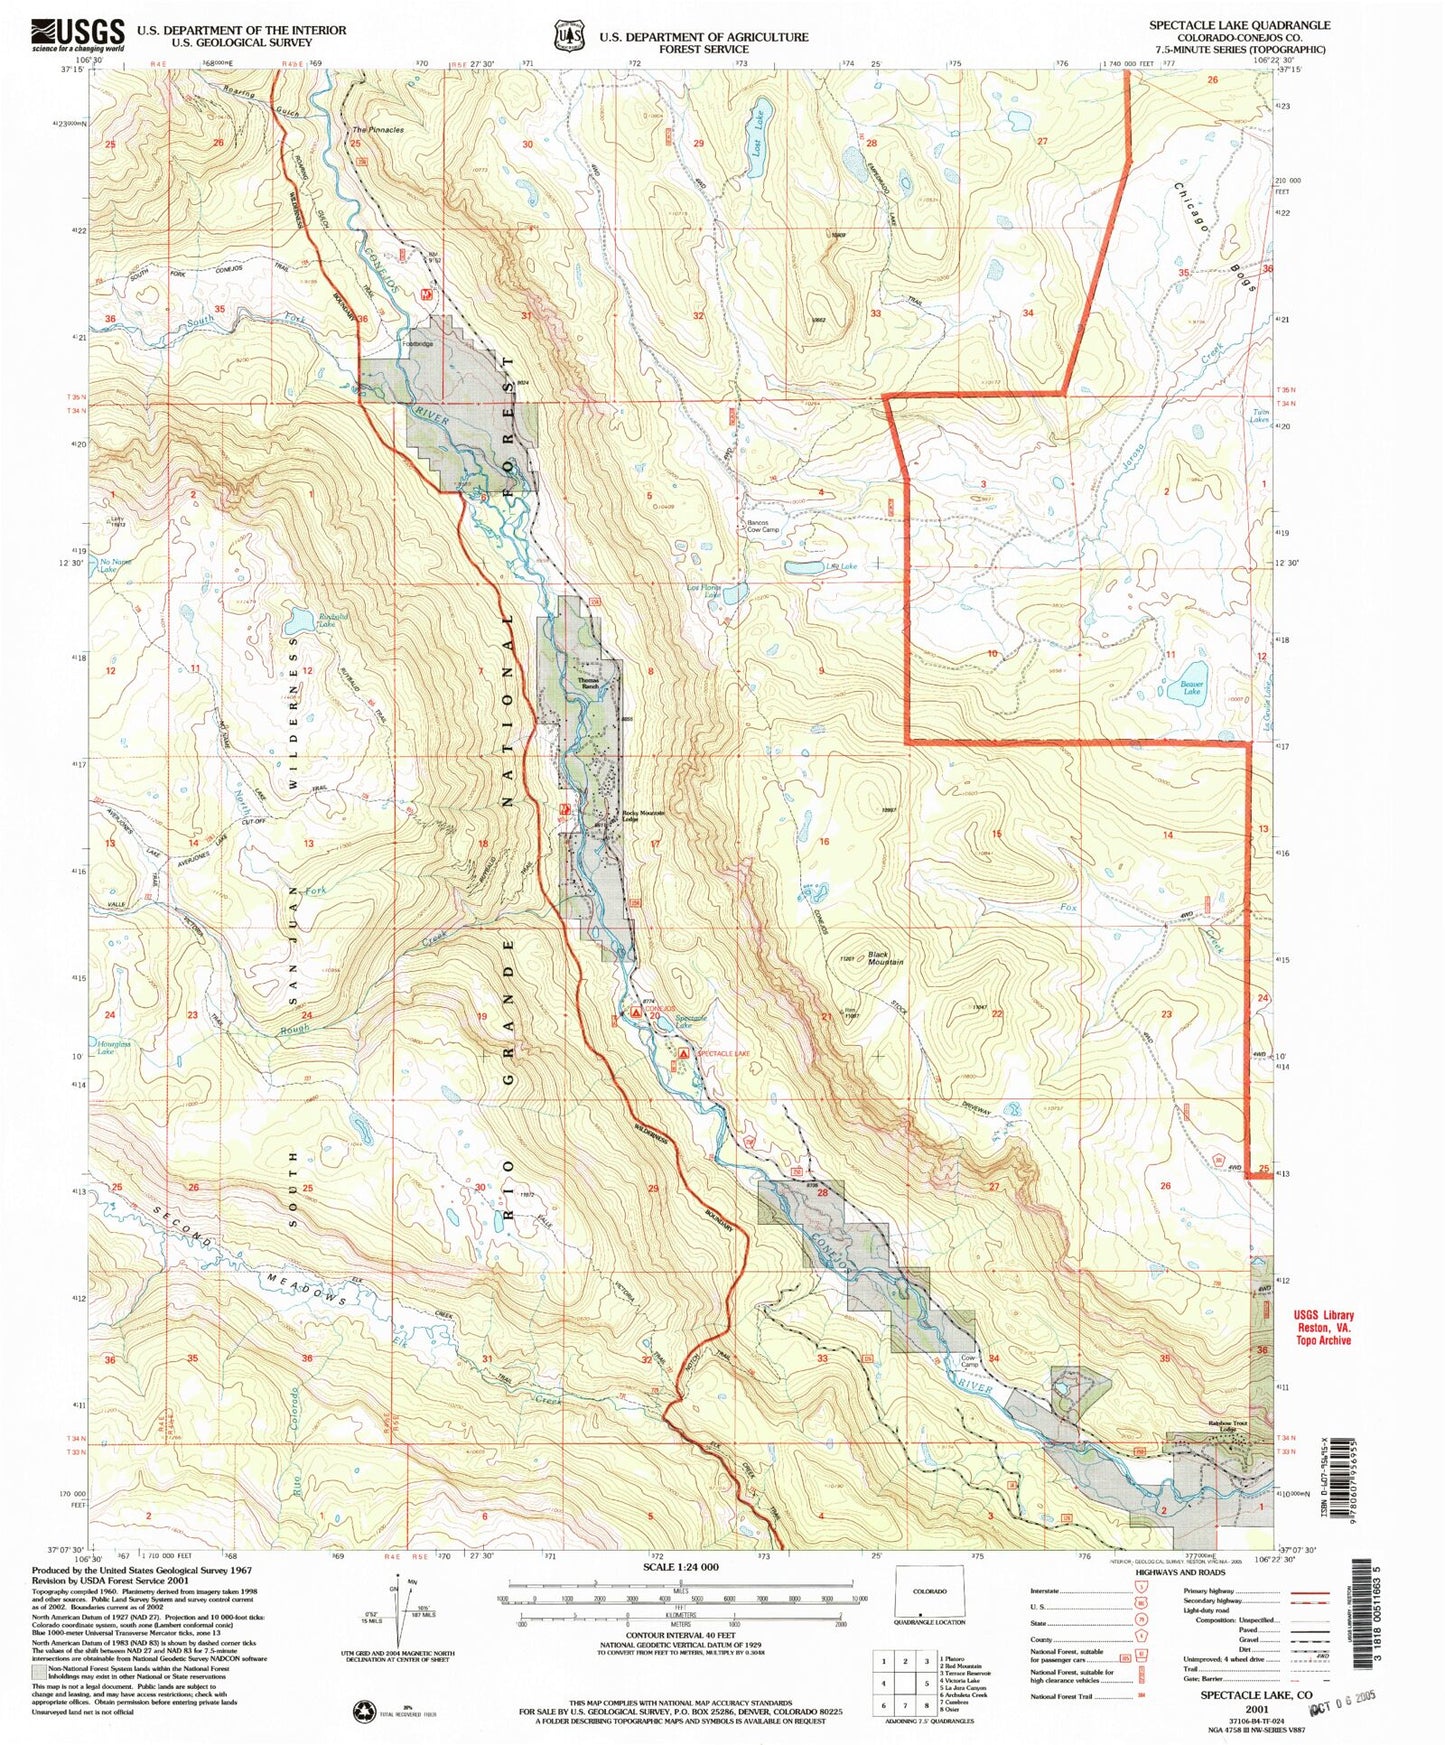 USGS Classic Spectacle Lake Colorado 7.5'x7.5' Topo Map Image